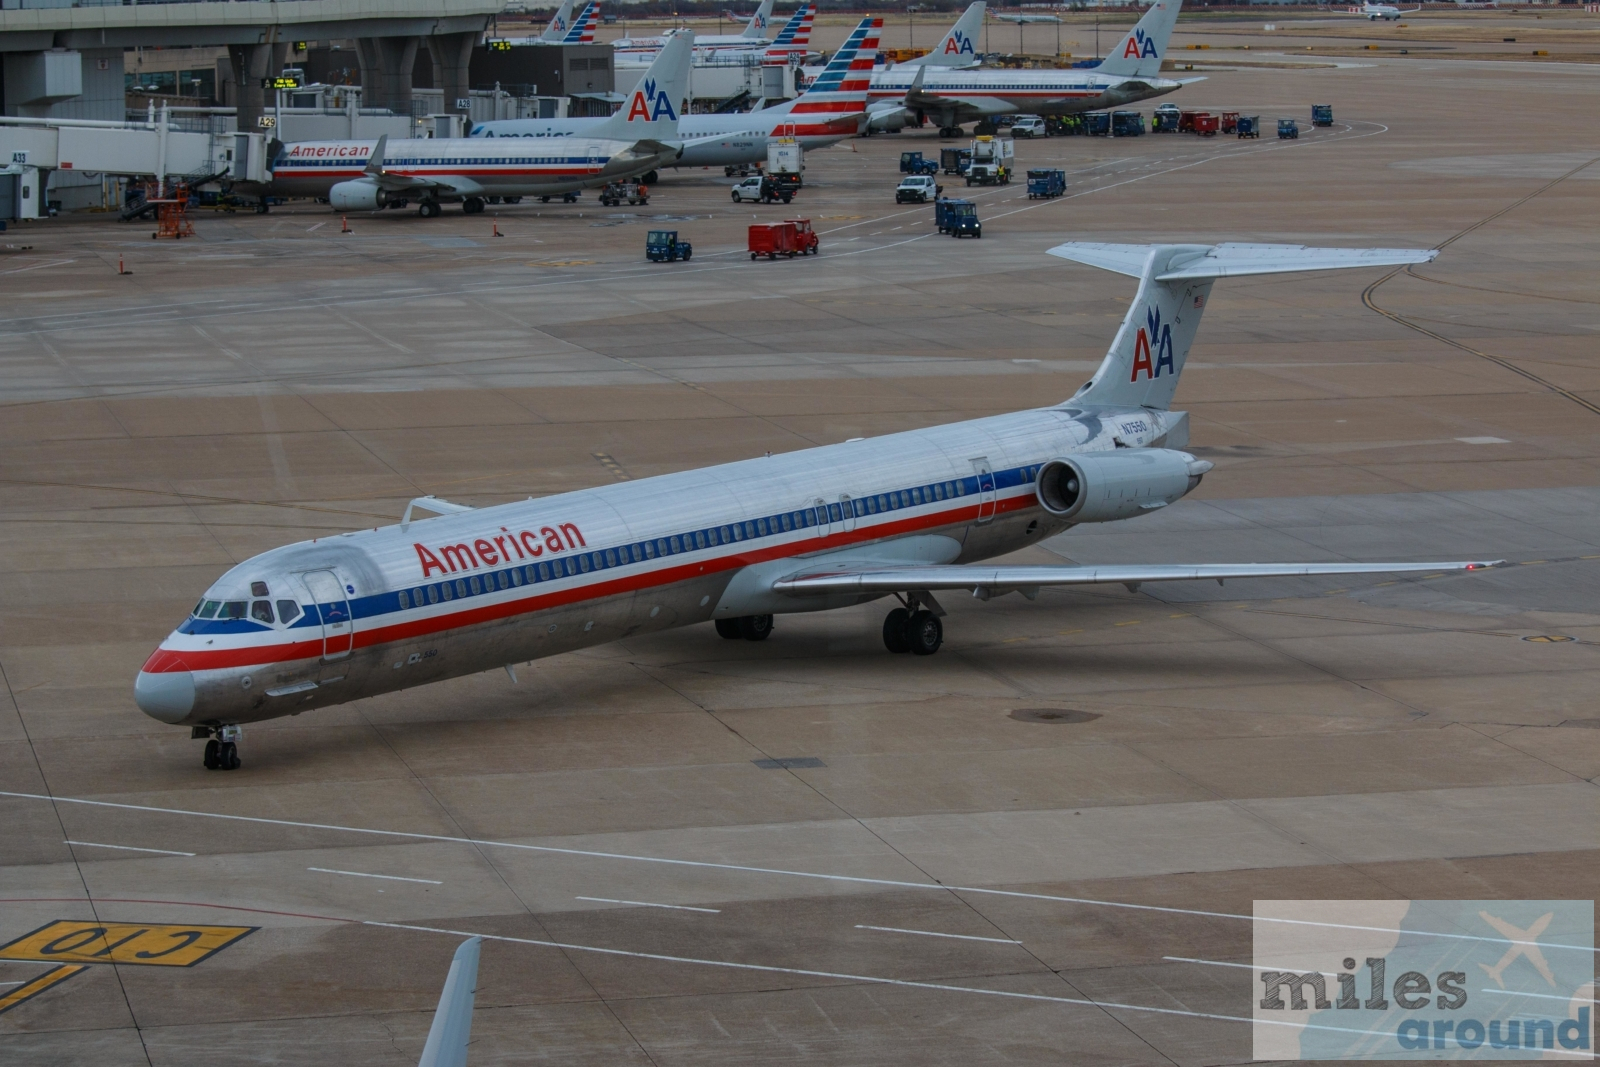 Read more about the article American Airlines Economy Class in der MD-82 „Mad Dog“ nach Dallas